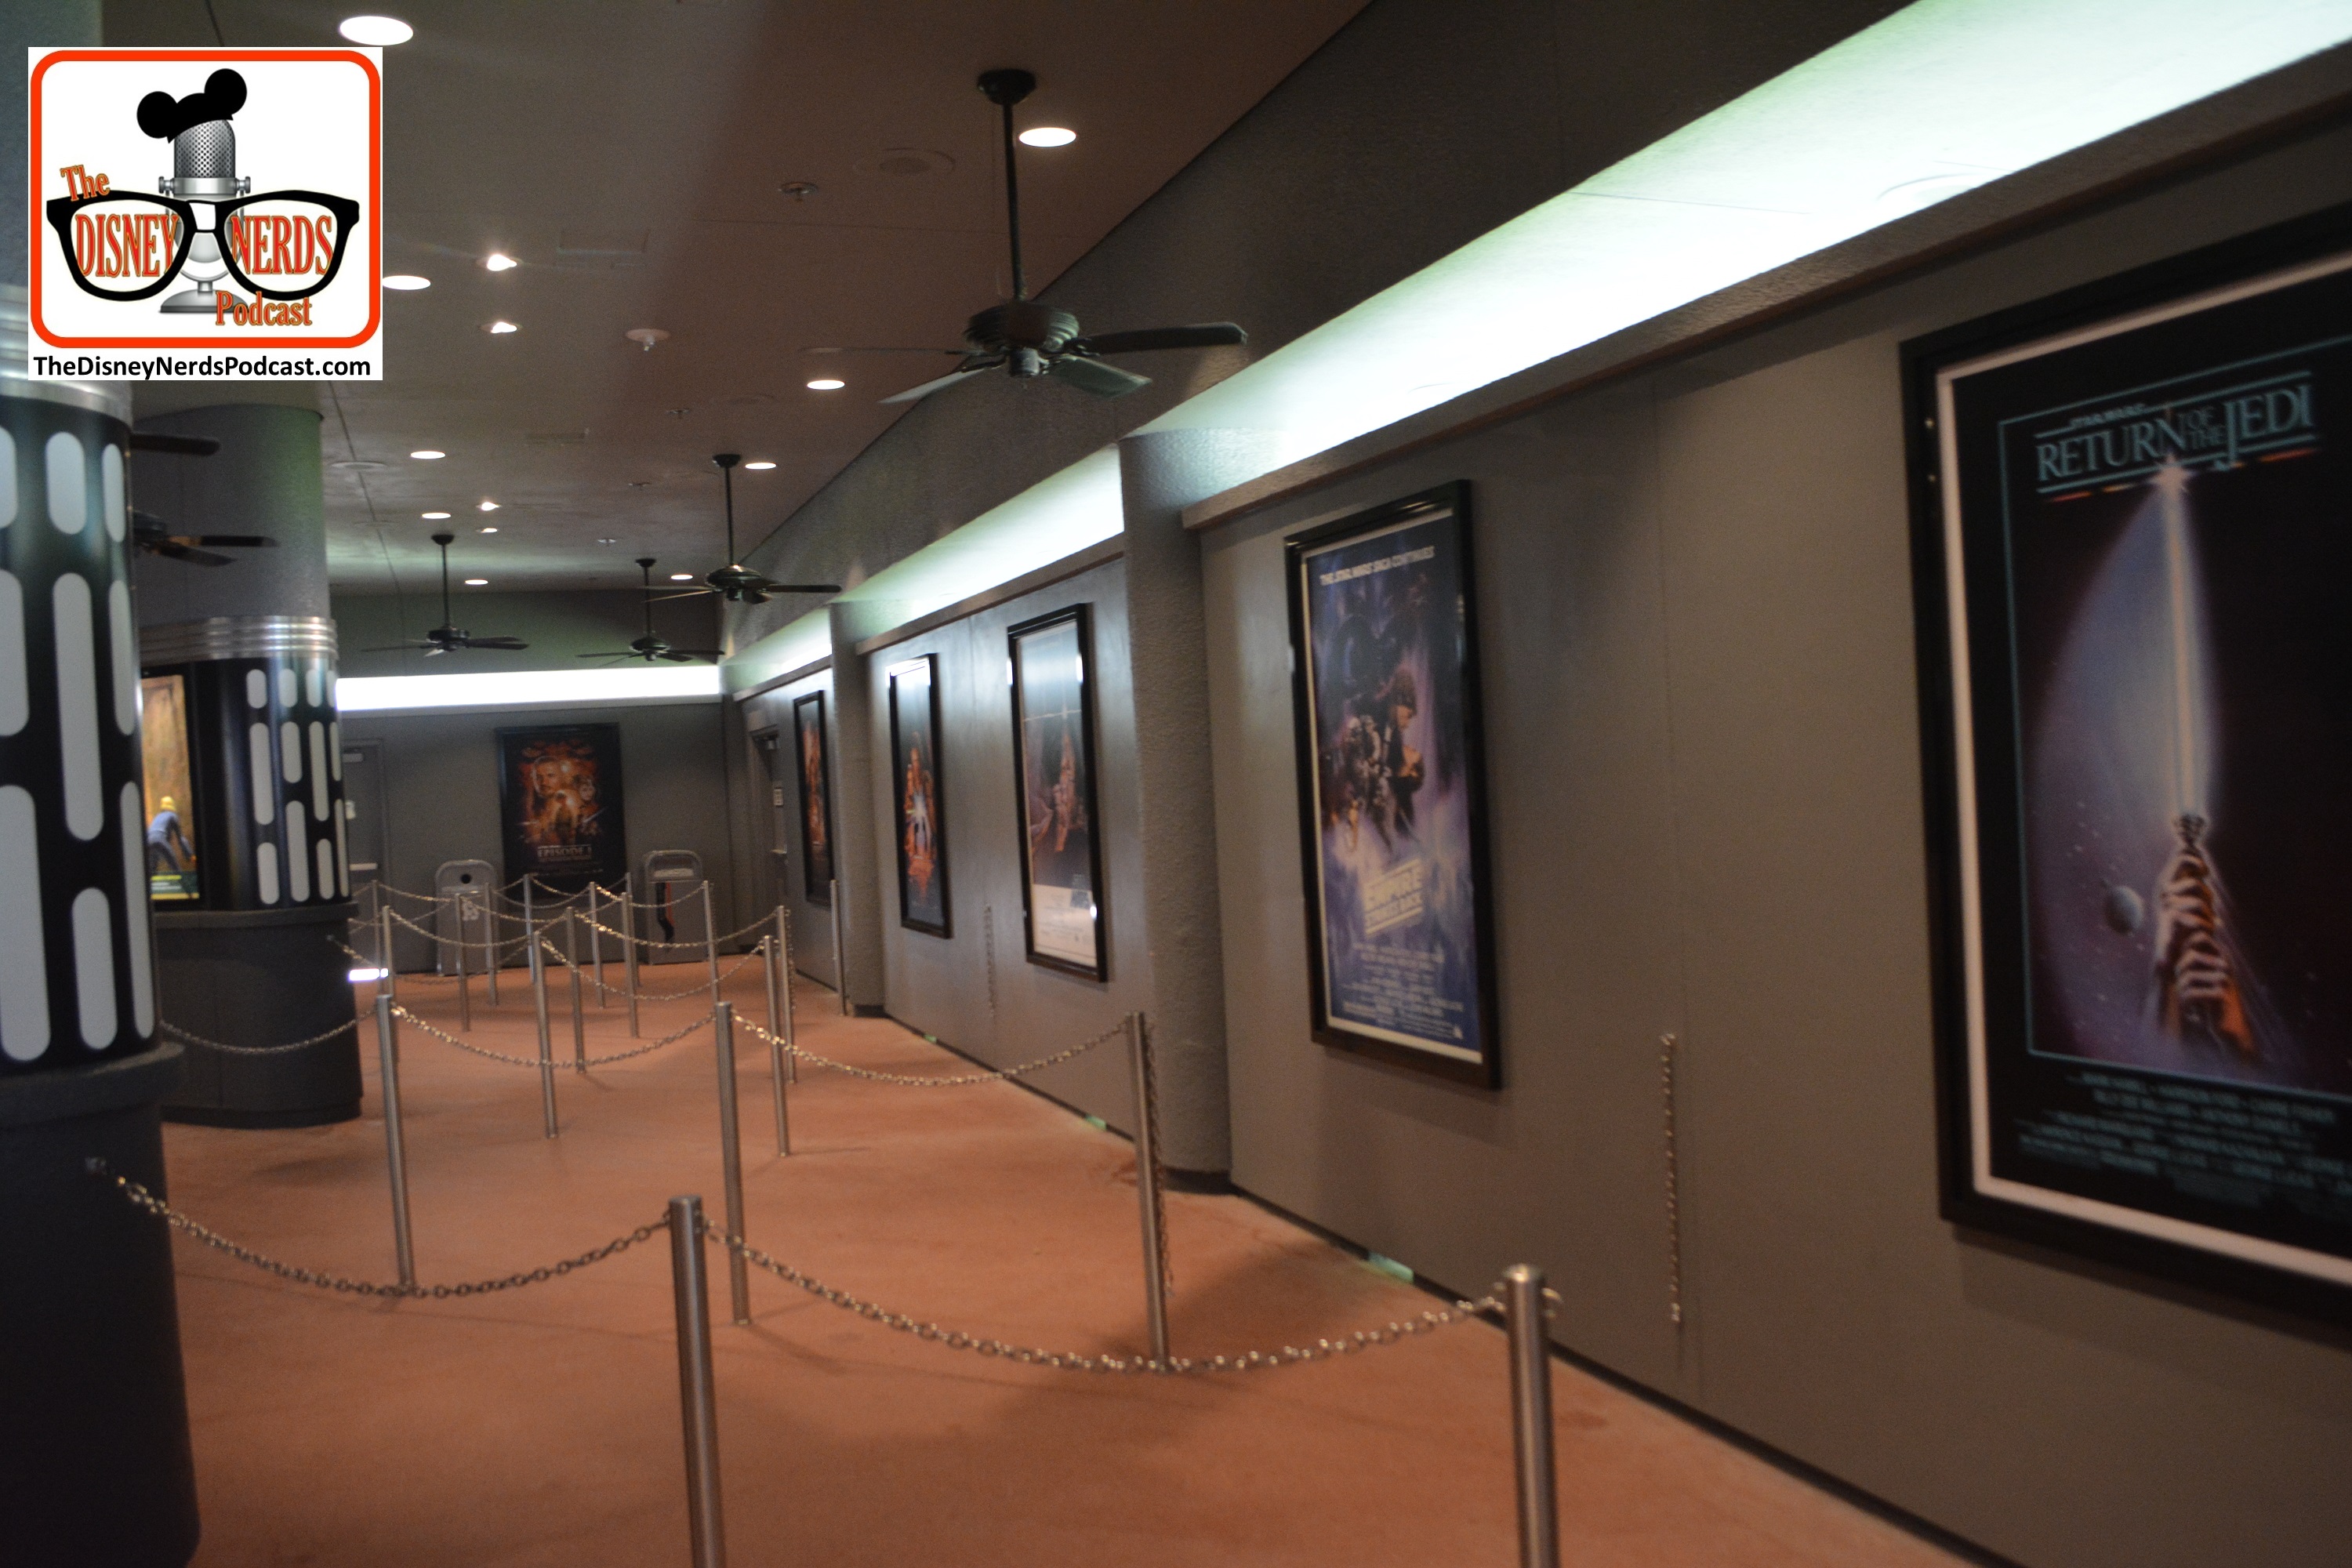 2015-12 - Hollywood Studios -Star Wars Posters cover the queue.